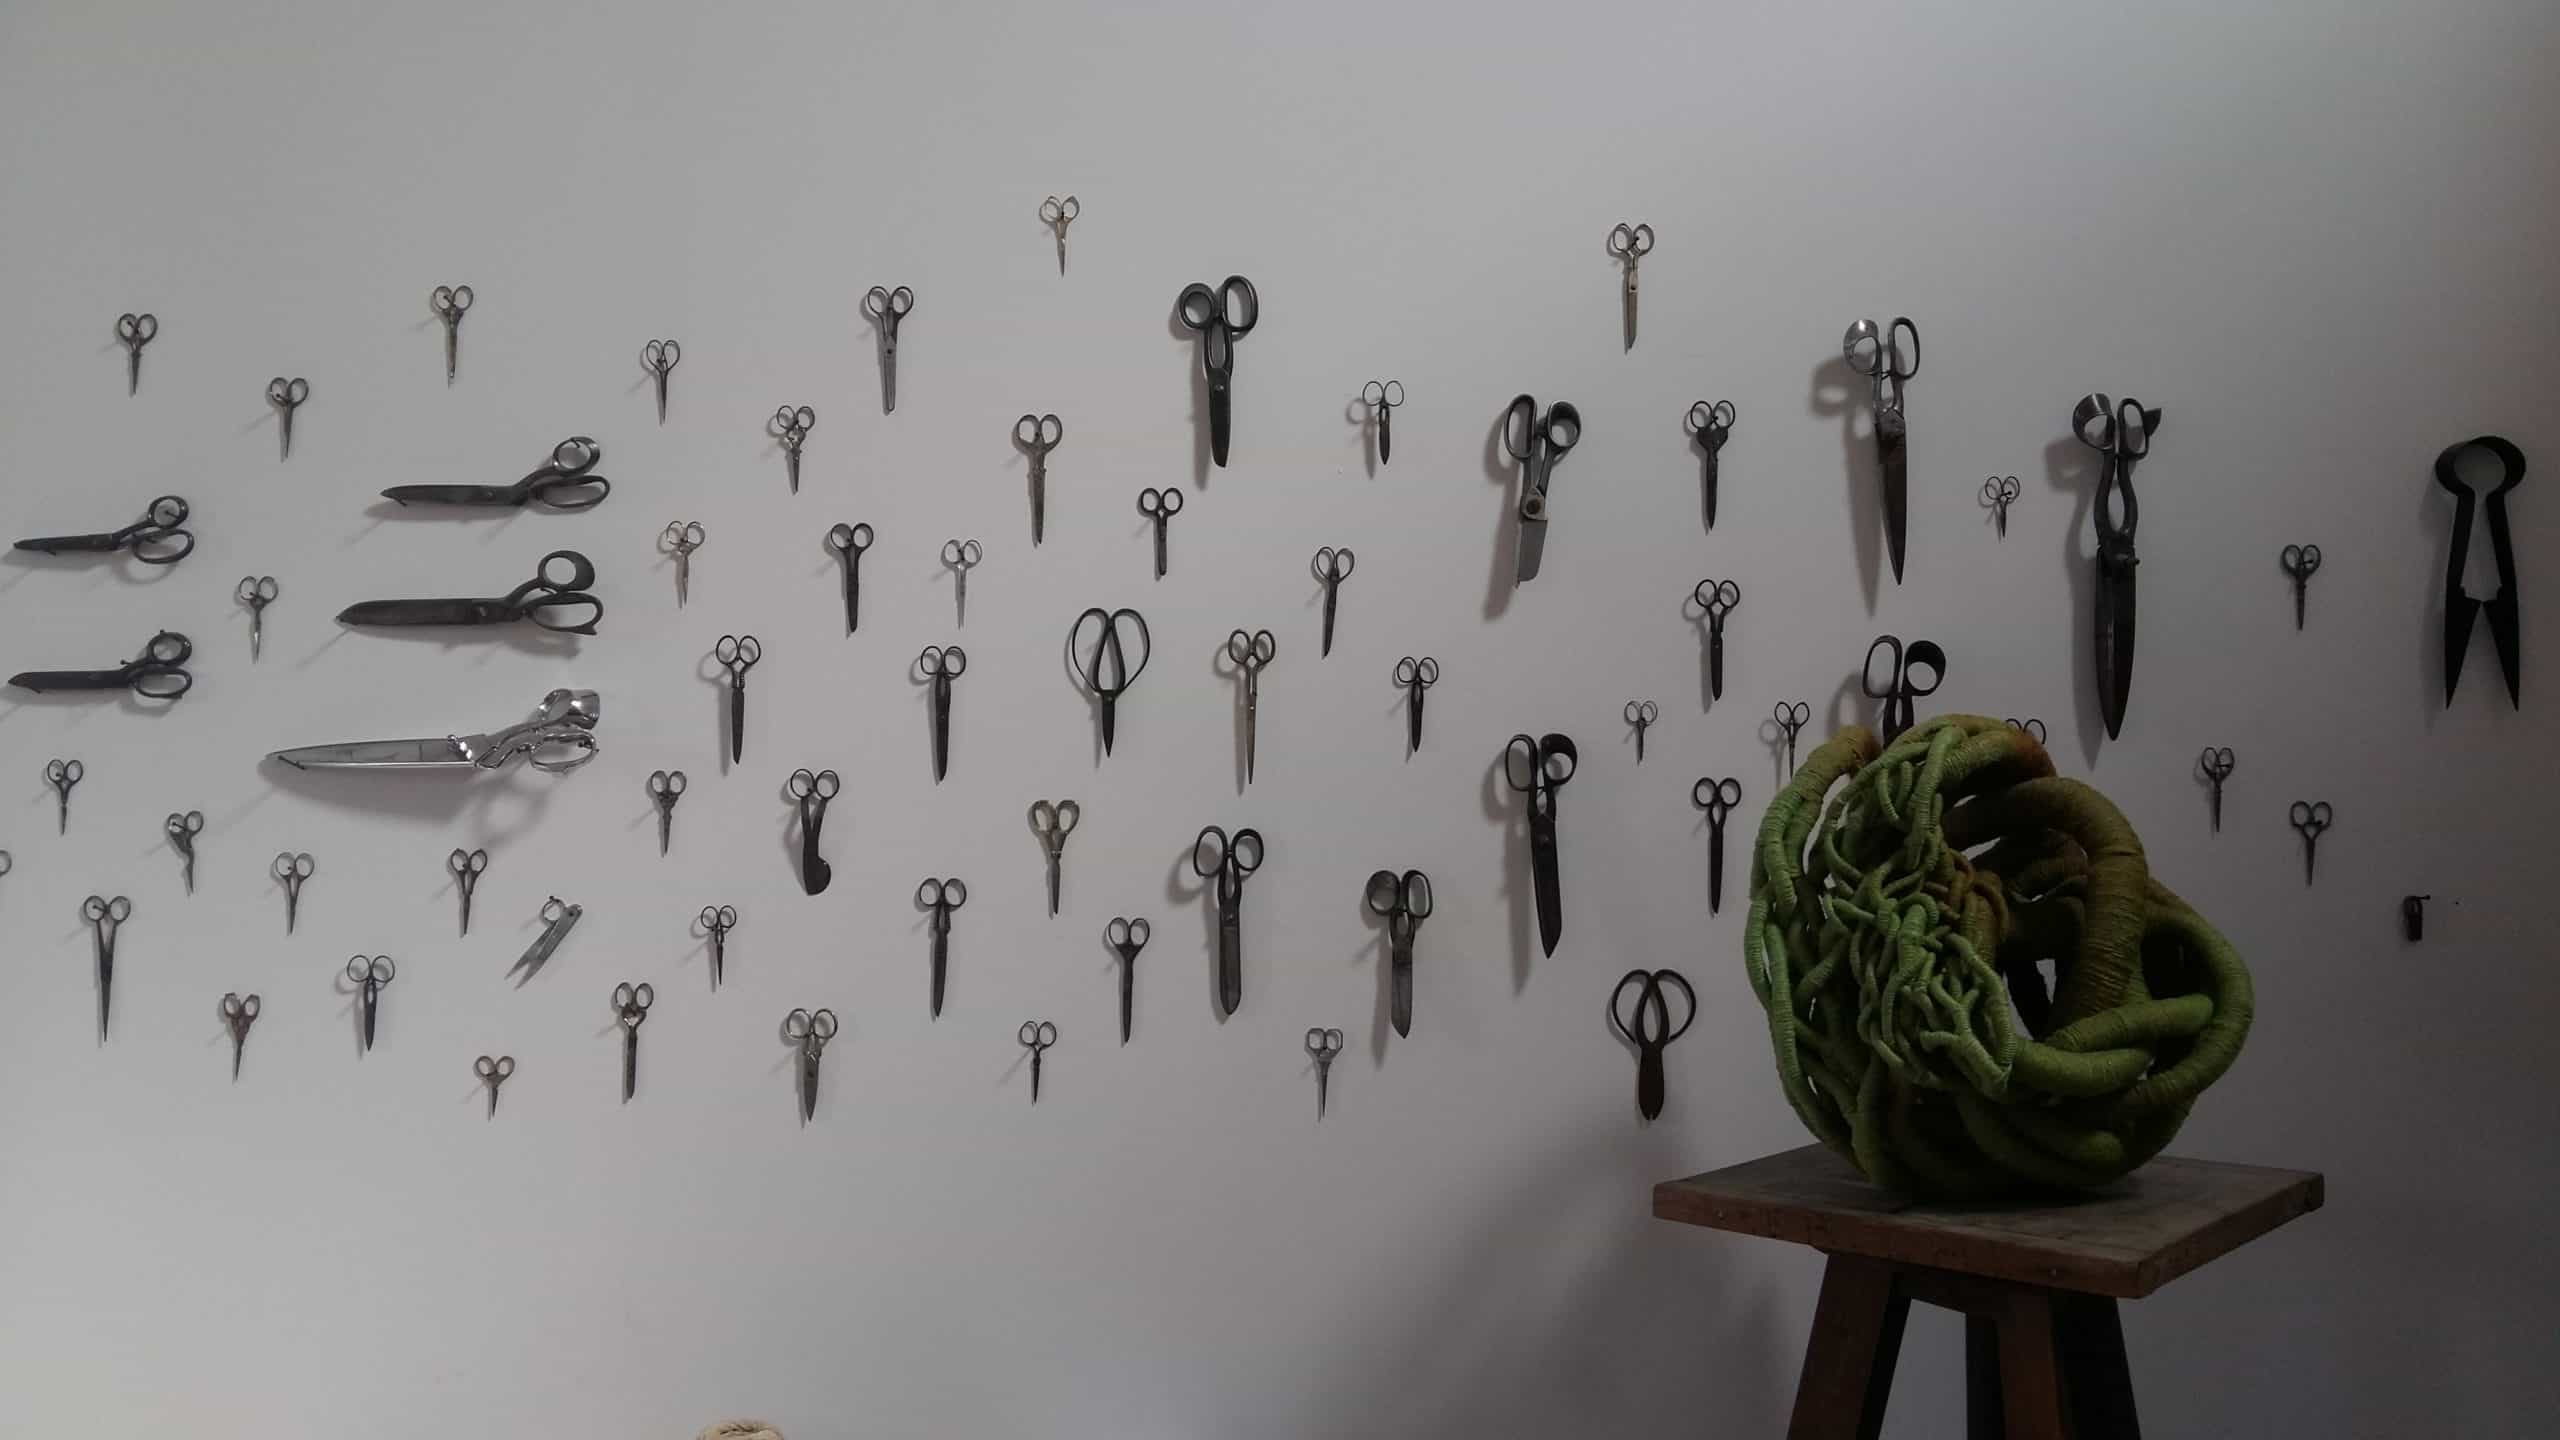 Picture of a sculpture and a collection of scissors on a wall in artist Aude Franjou's workshop.